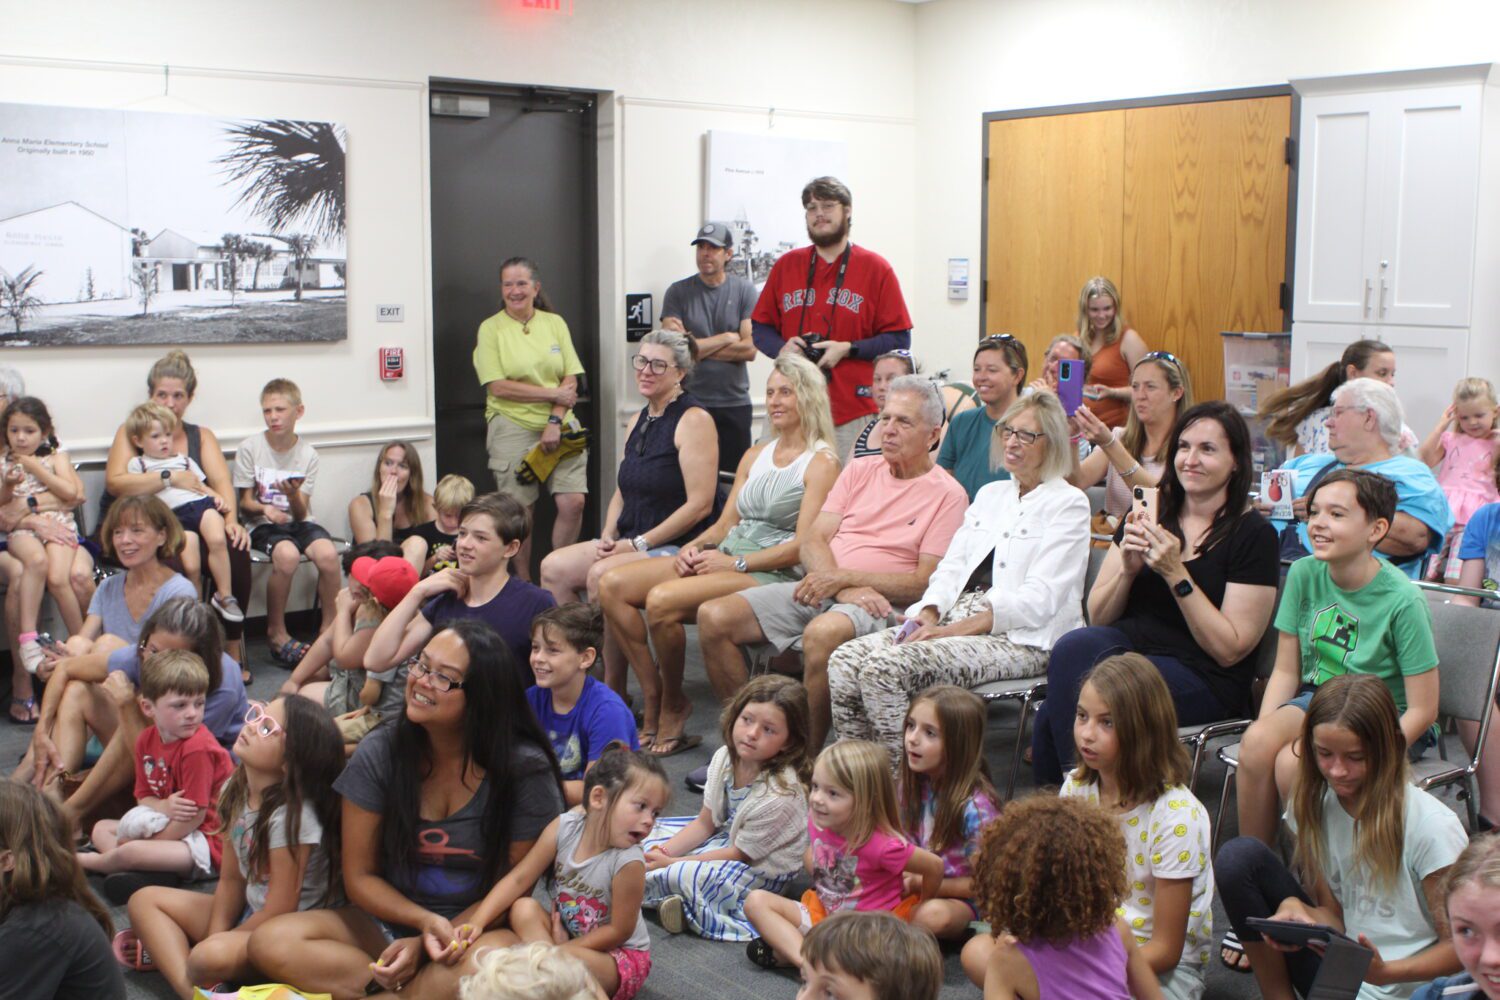 Owl presentation a ‘hoot’ at Island Branch Library